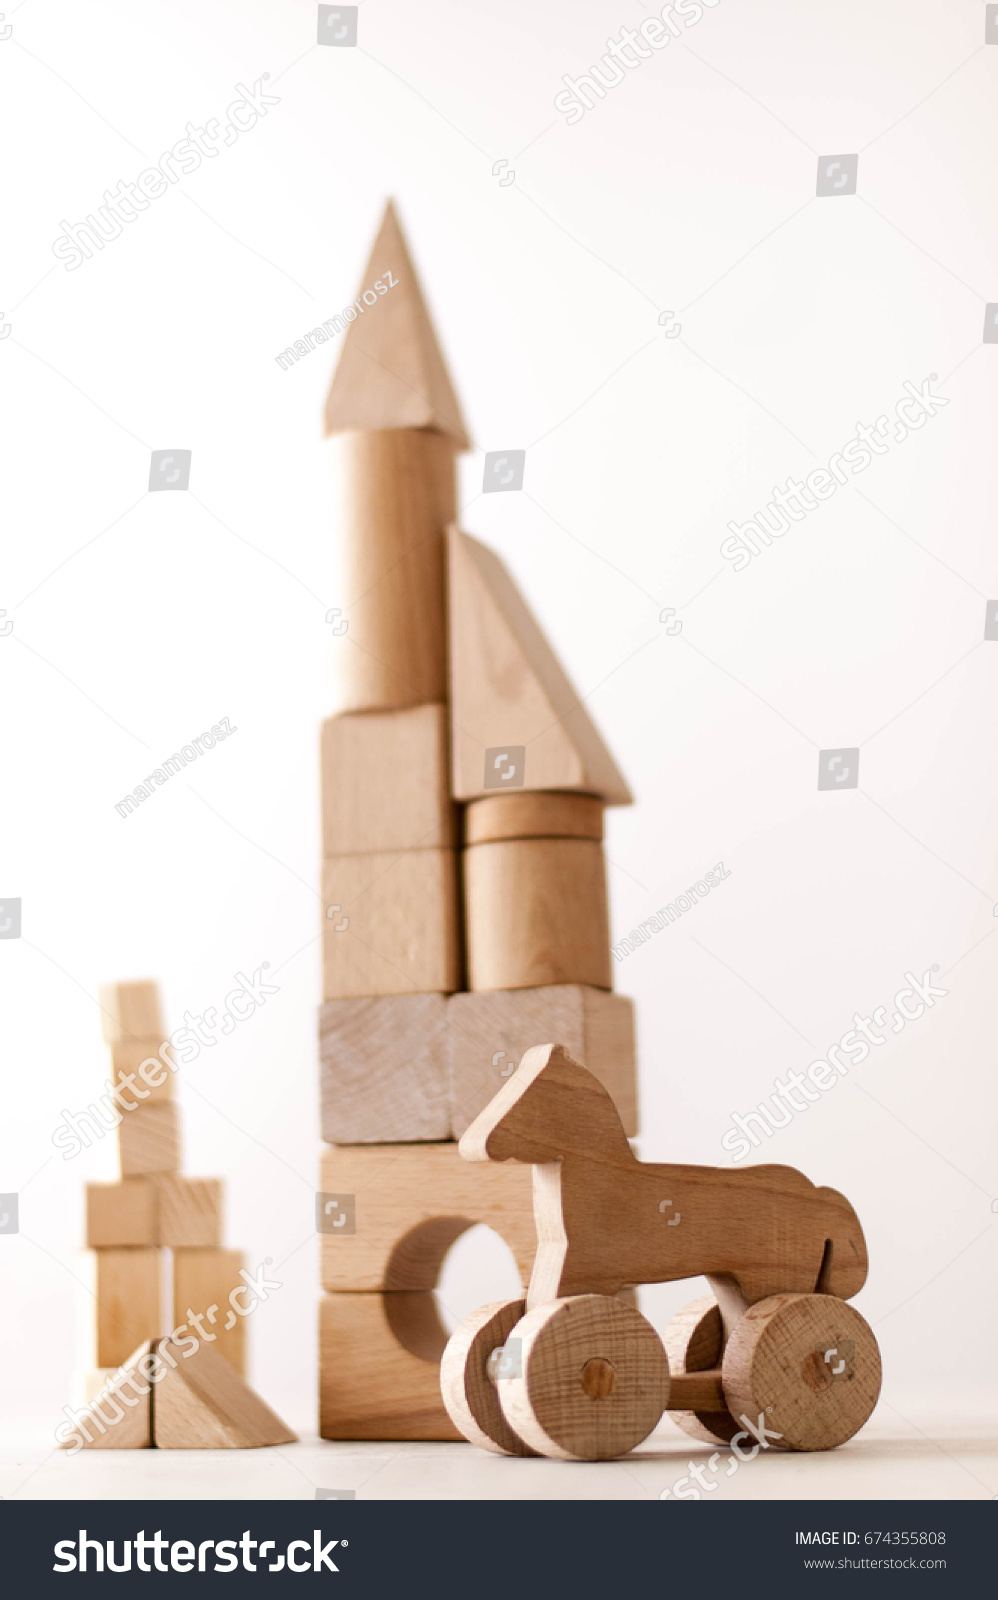 wooden houses made from  different wooden shapes and forms for kids skills developments #674355808